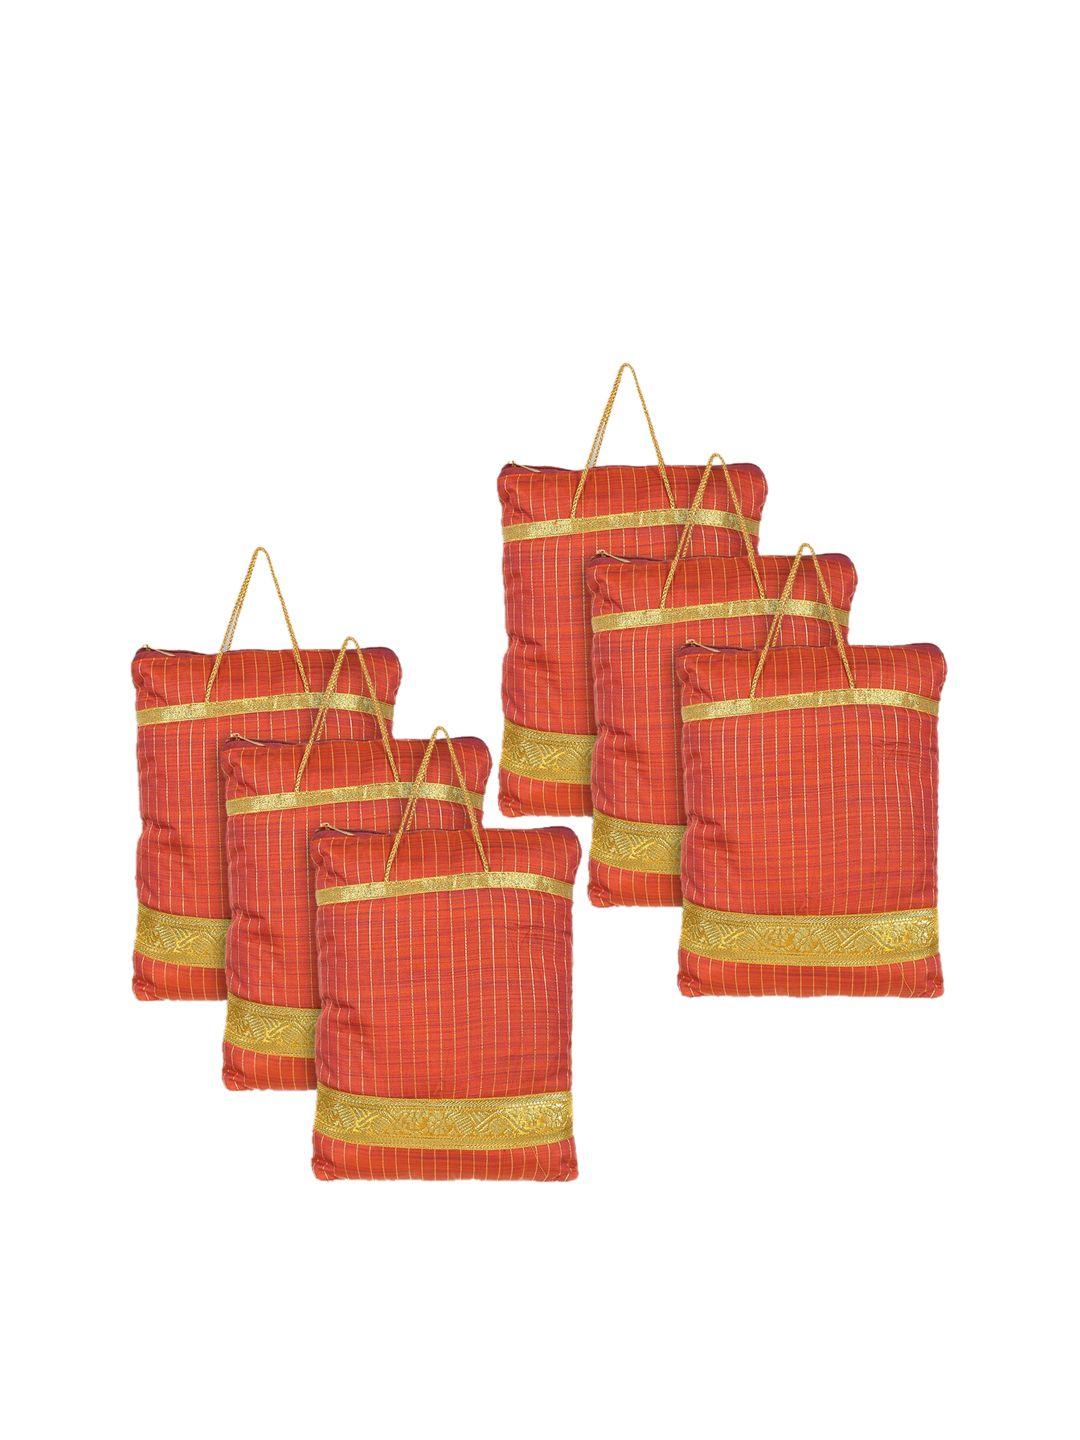 kuber industries pack of 6 red checked embellished shopper tote bag